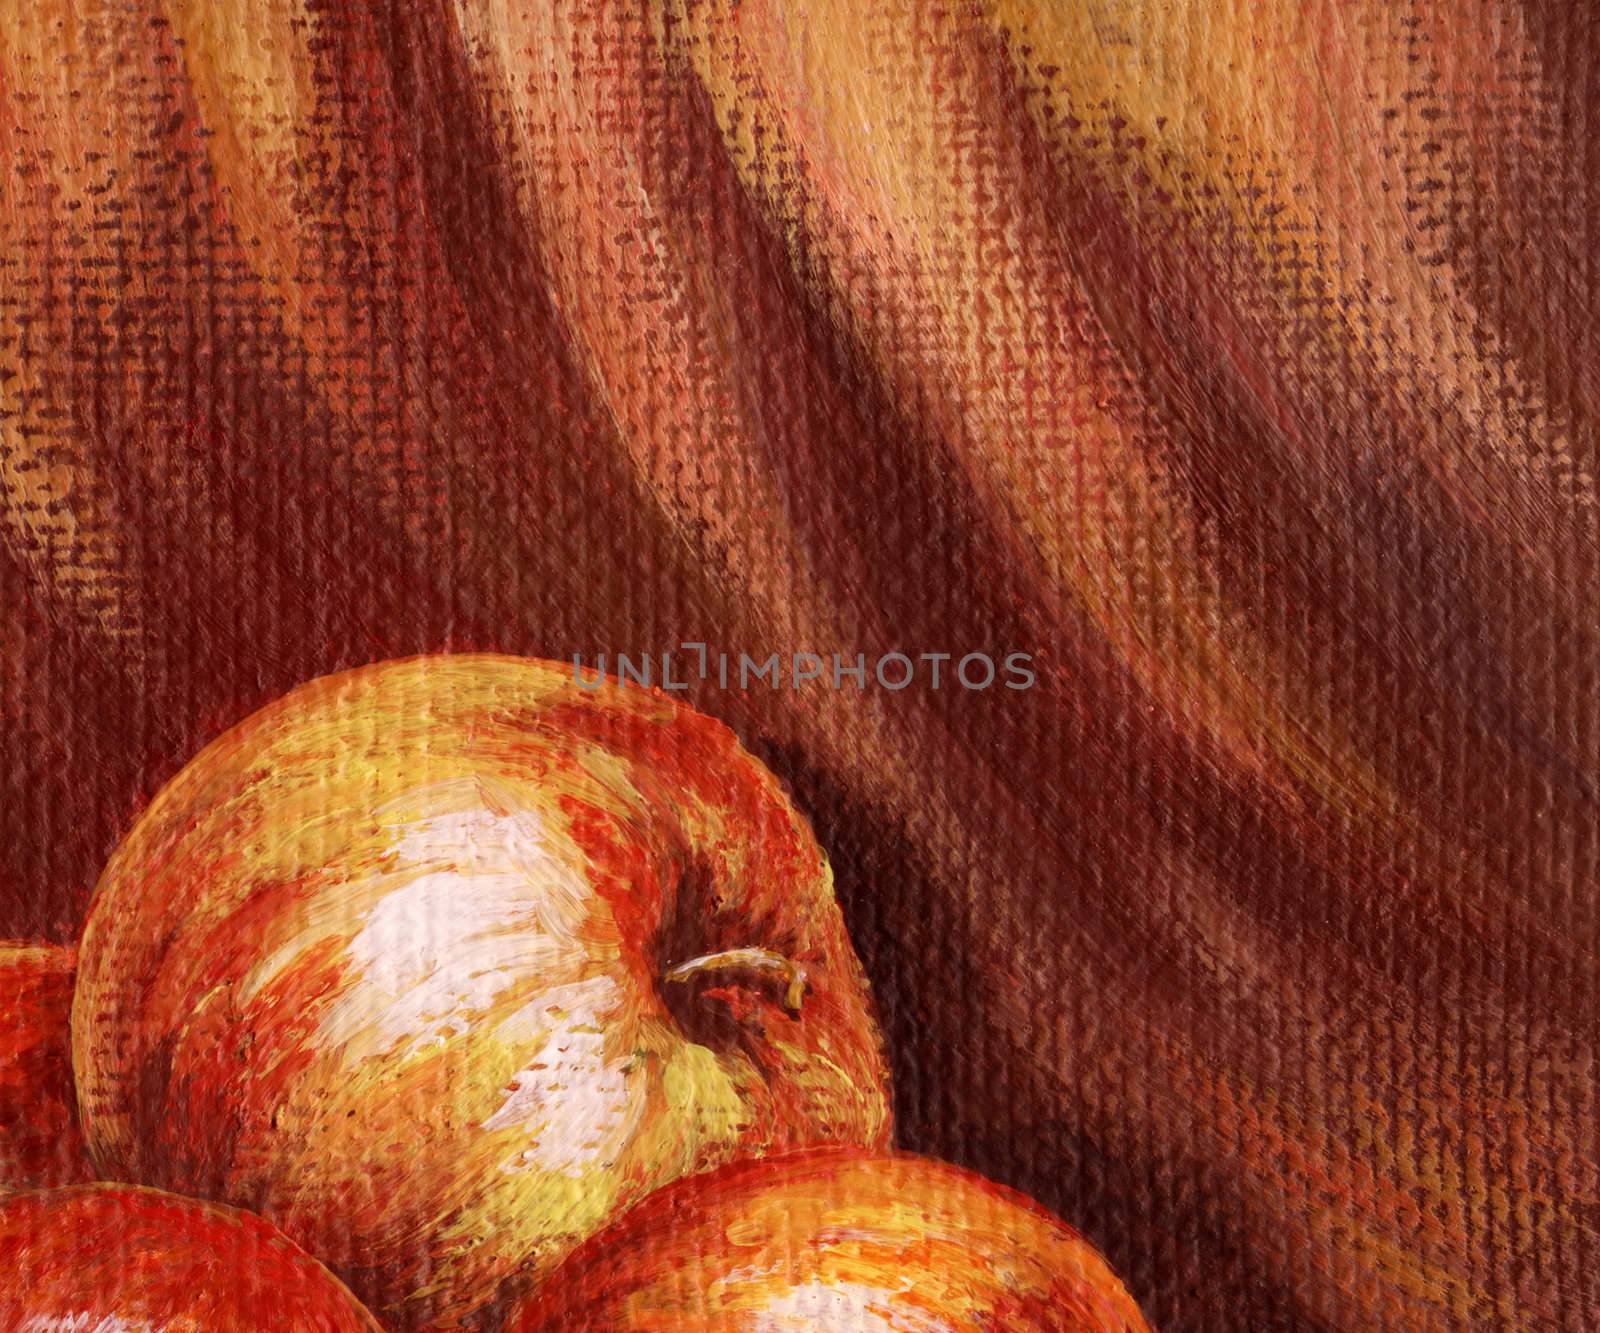 Apples on a red by alexcoolok